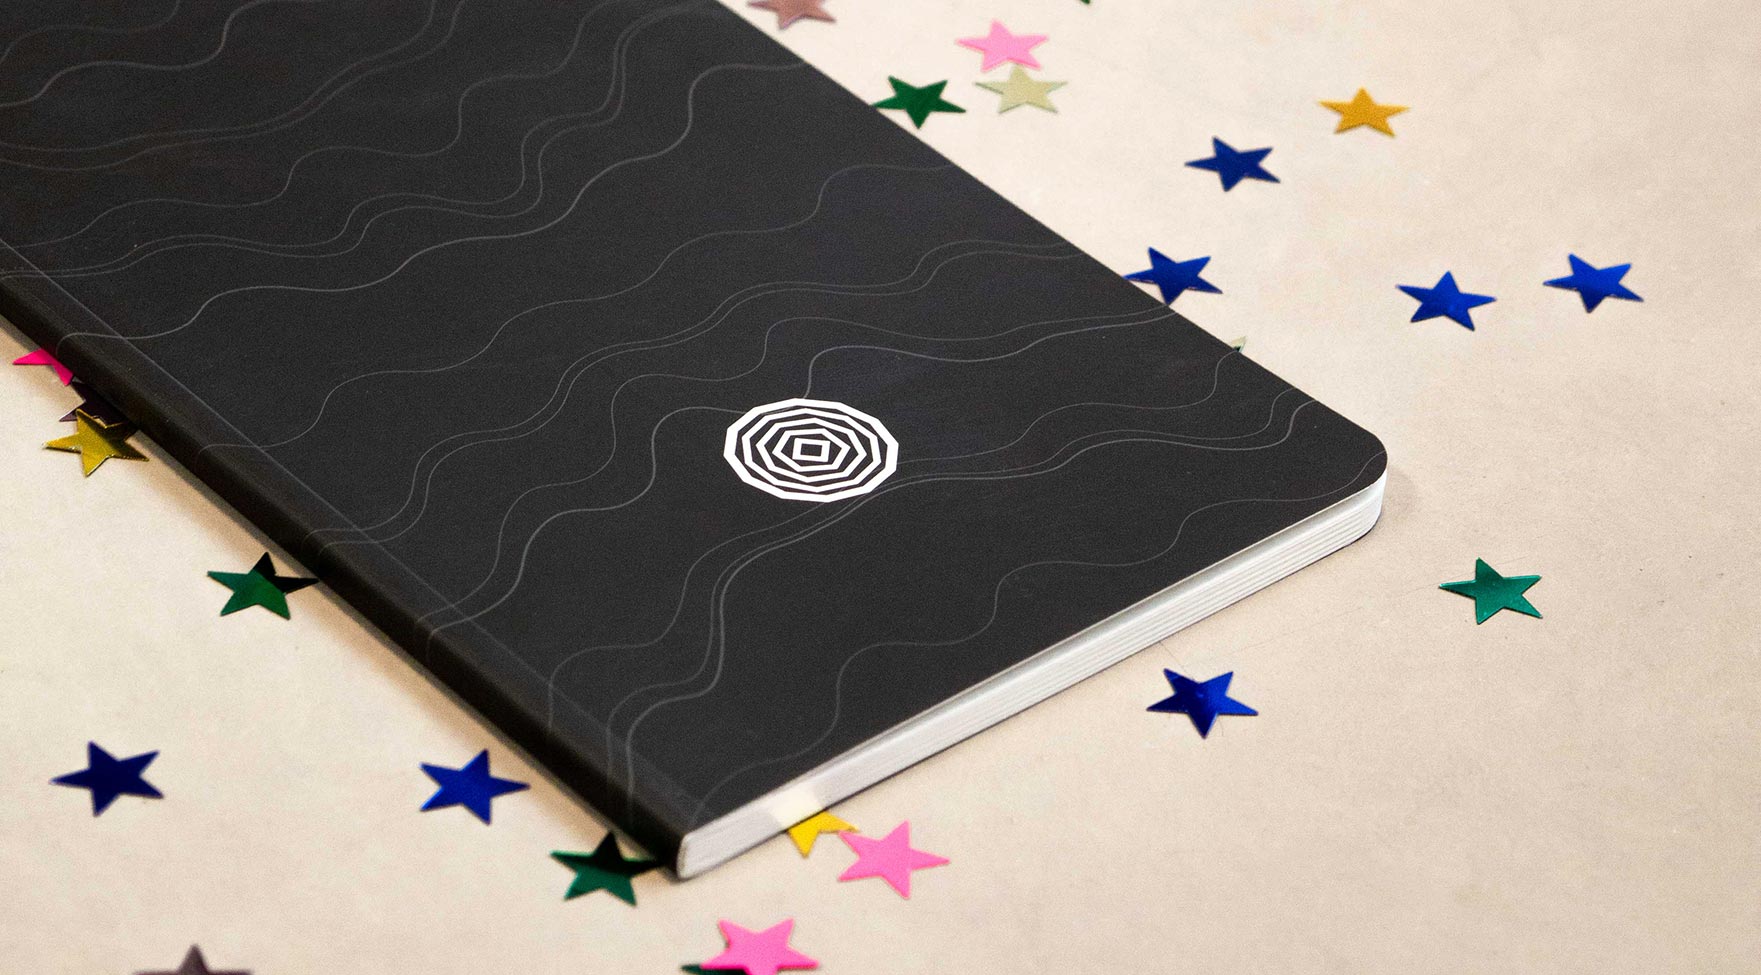 Present perfect: Seven reasons stone notebooks make great gifts